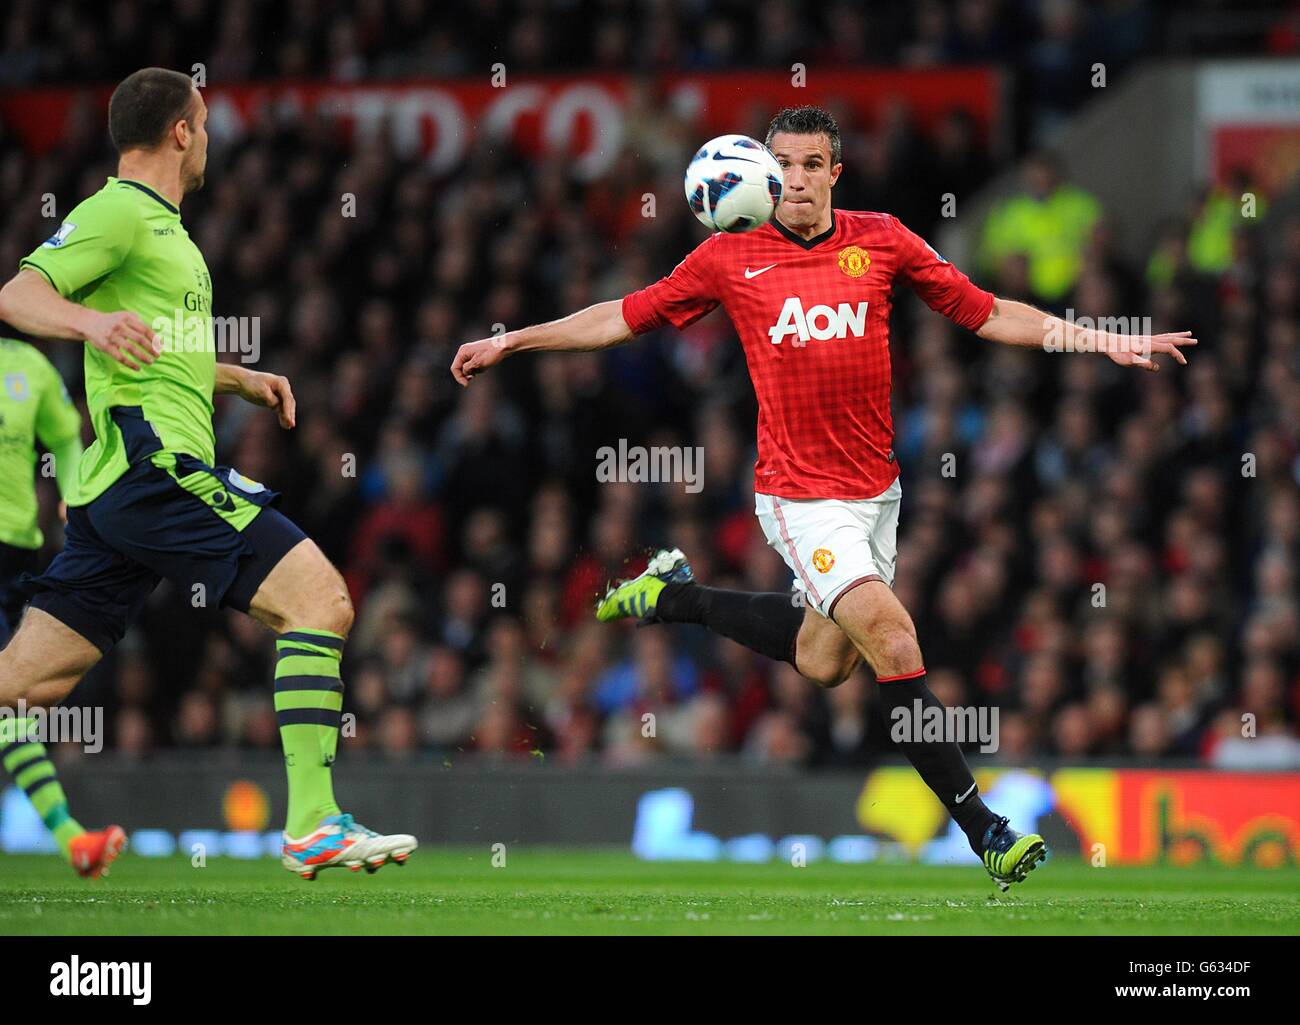 Manchester United's Robin van Persie shoots to score his team's second goal  Stock Photo - Alamy